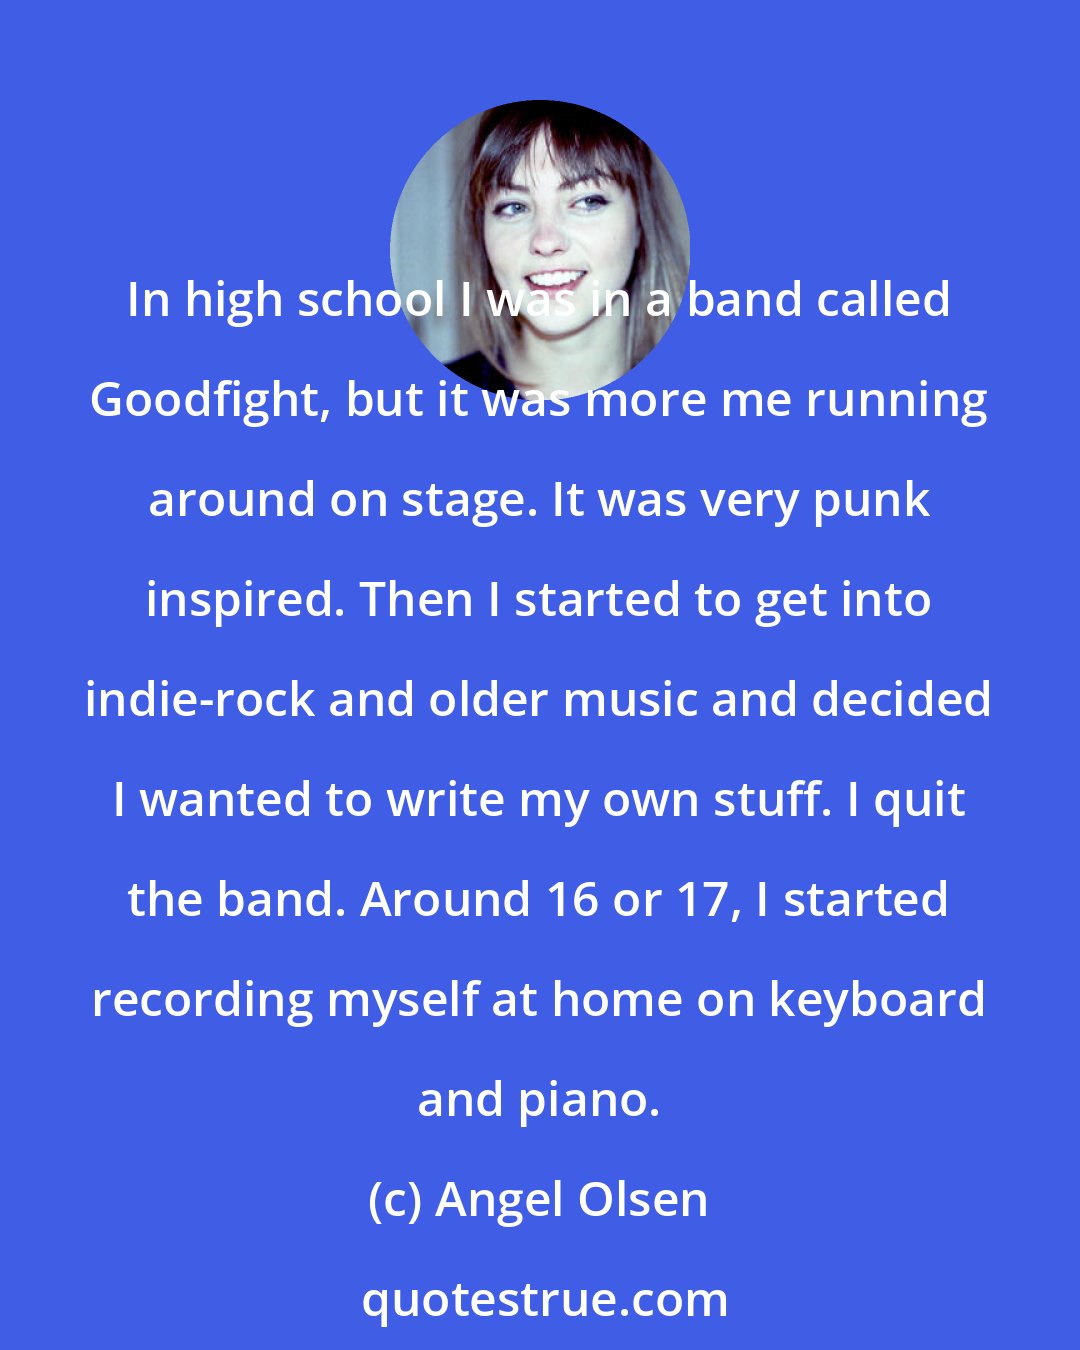 Angel Olsen: In high school I was in a band called Goodfight, but it was more me running around on stage. It was very punk inspired. Then I started to get into indie-rock and older music and decided I wanted to write my own stuff. I quit the band. Around 16 or 17, I started recording myself at home on keyboard and piano.